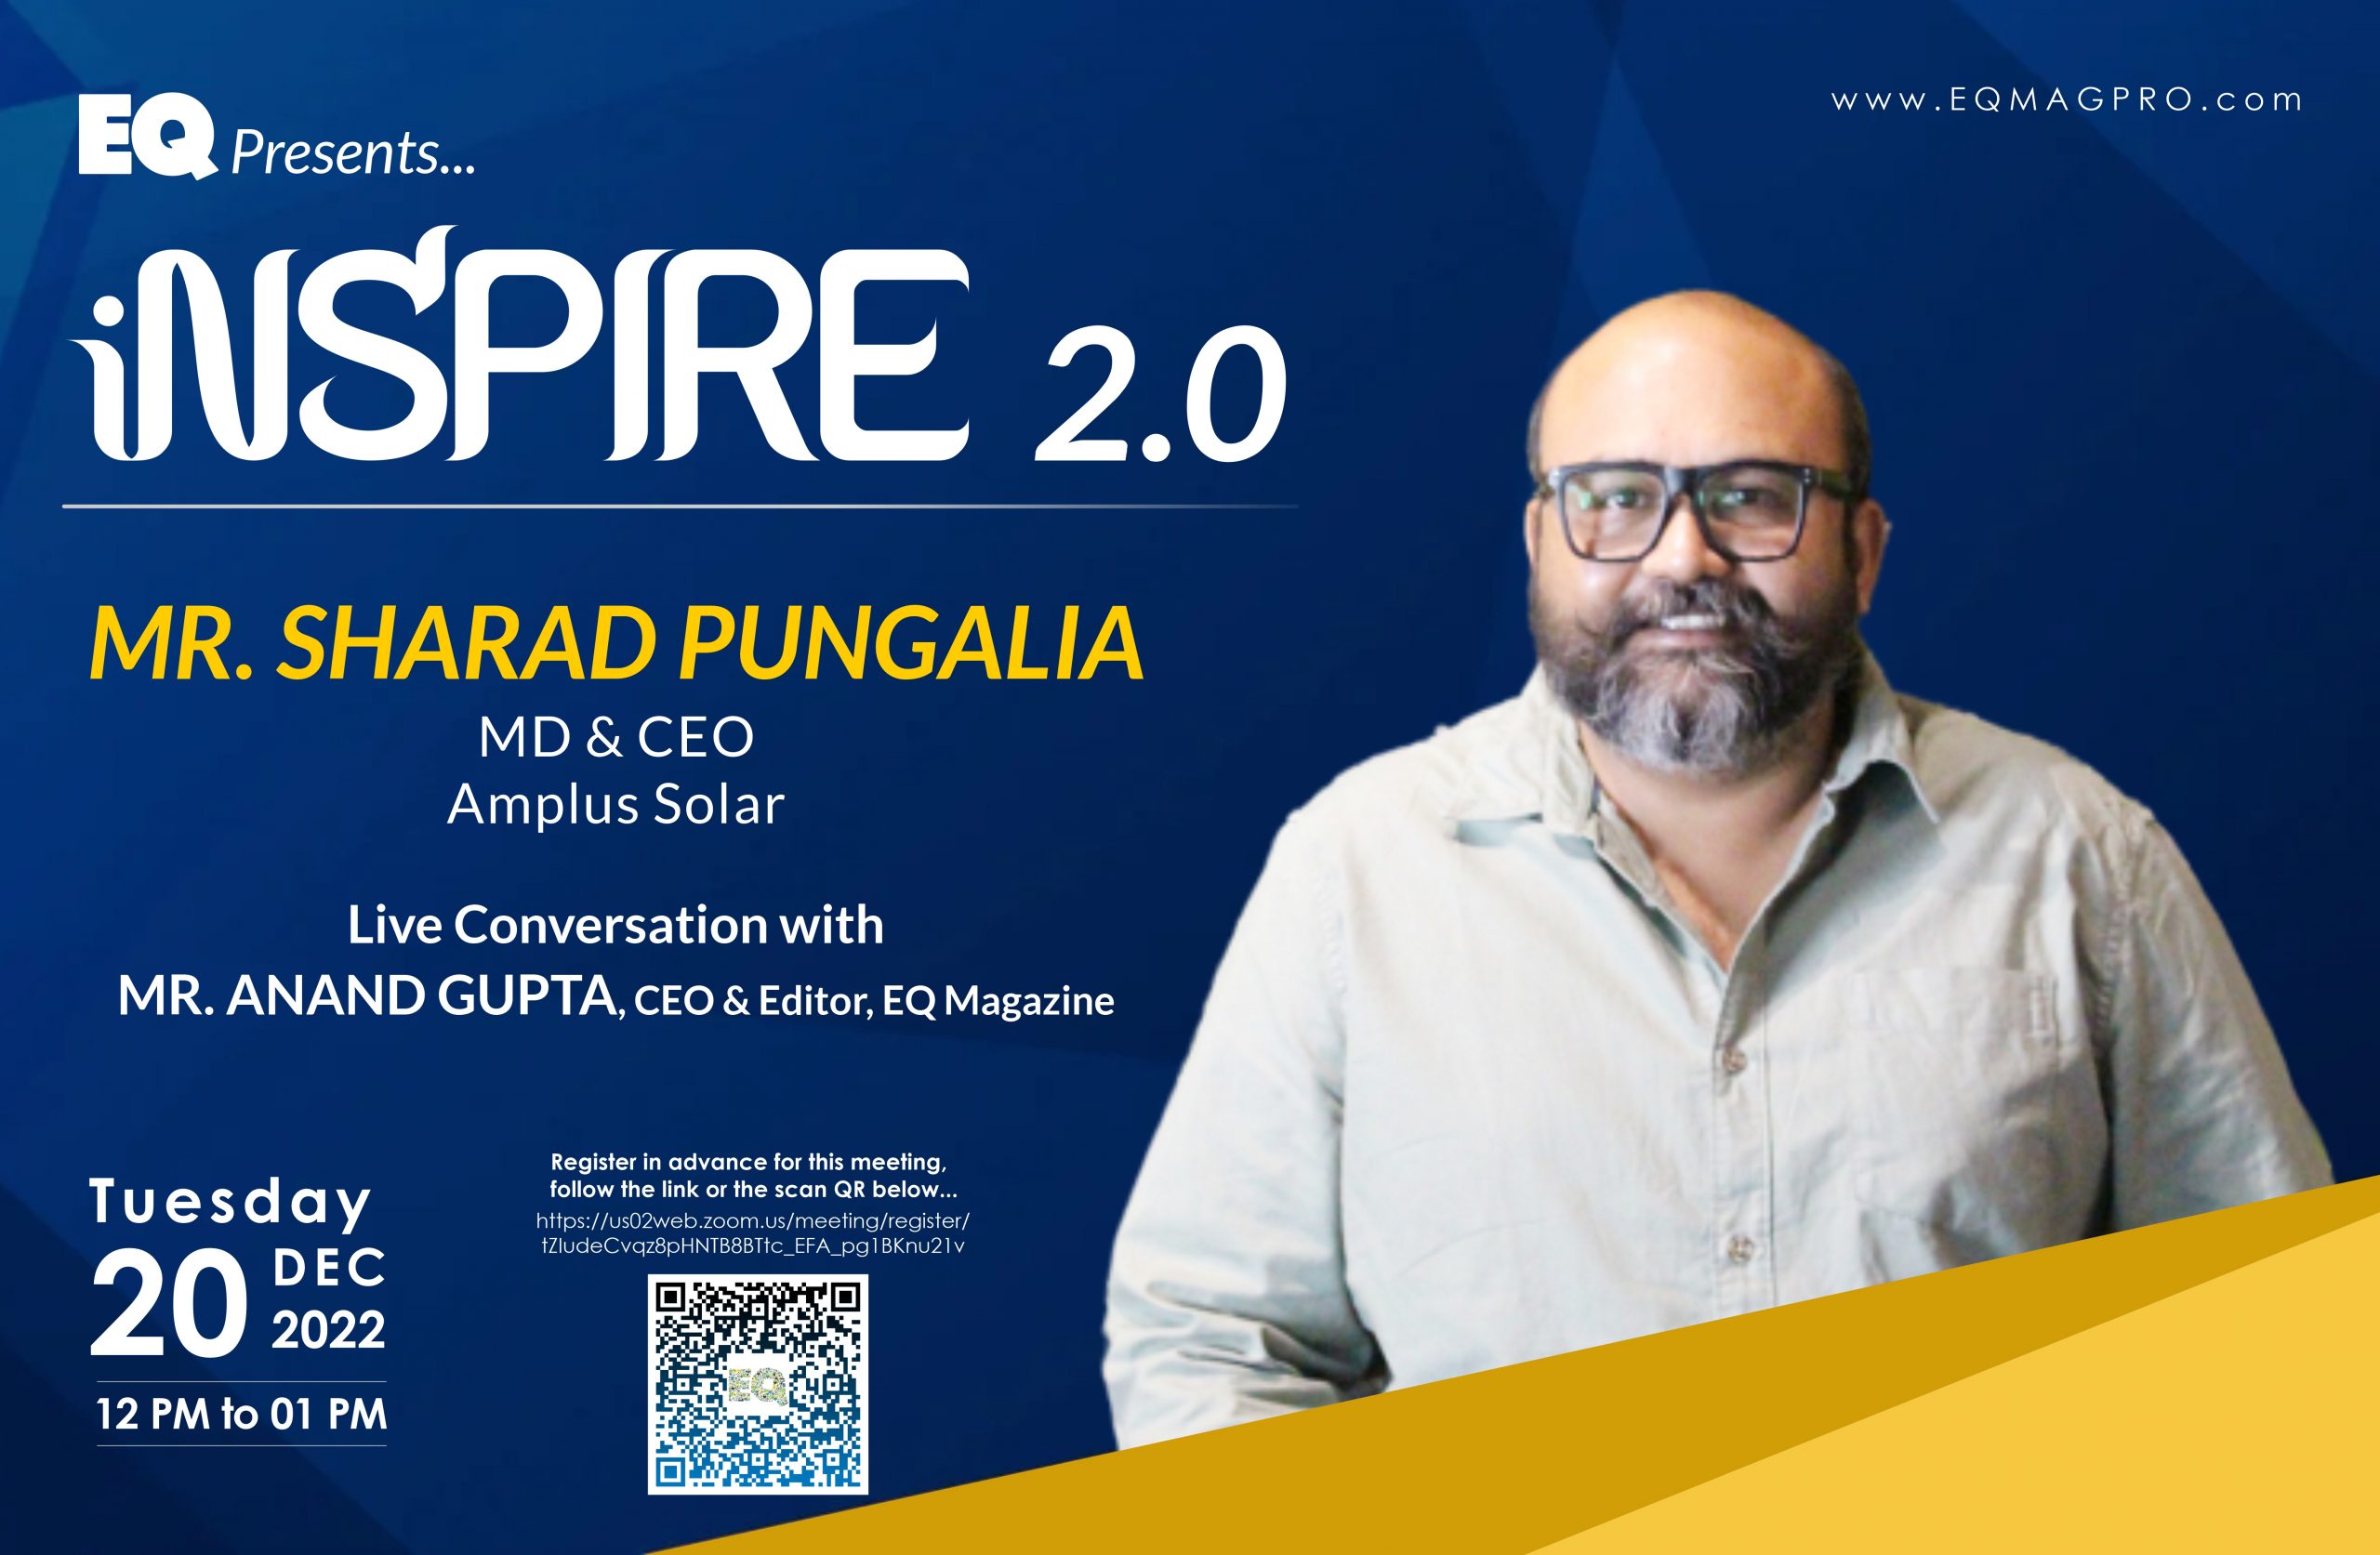 EQ In Exclusive Conversation With Mr.Sharad Pungalia, MD & CEO of Amplus Solar on Tuesday December 20th 2022 from 12:00 PM Onwards….Register Now !!!